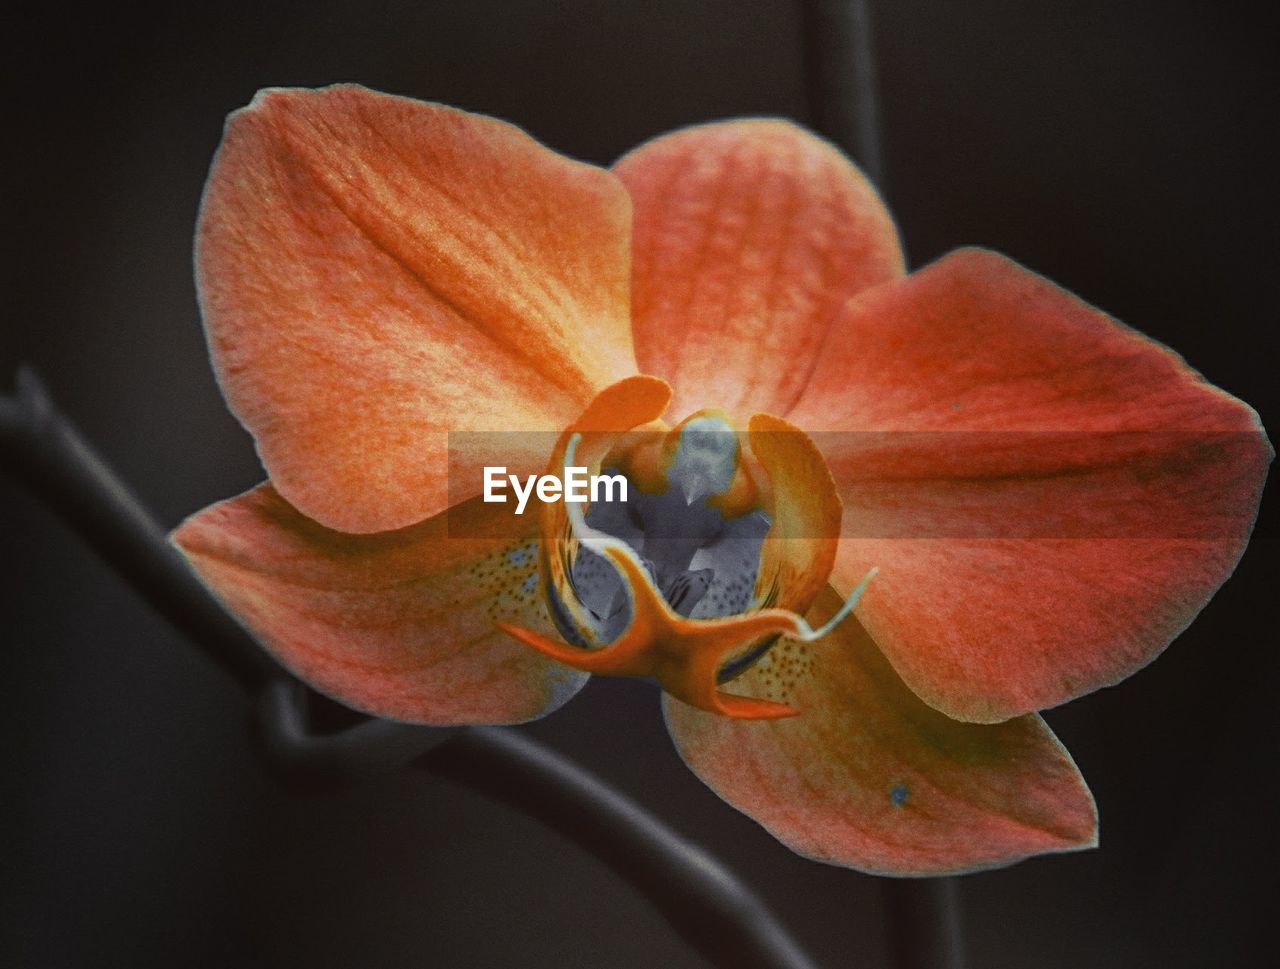 CLOSE-UP OF ORANGE DAY LILY BLOOMING IN BLACK